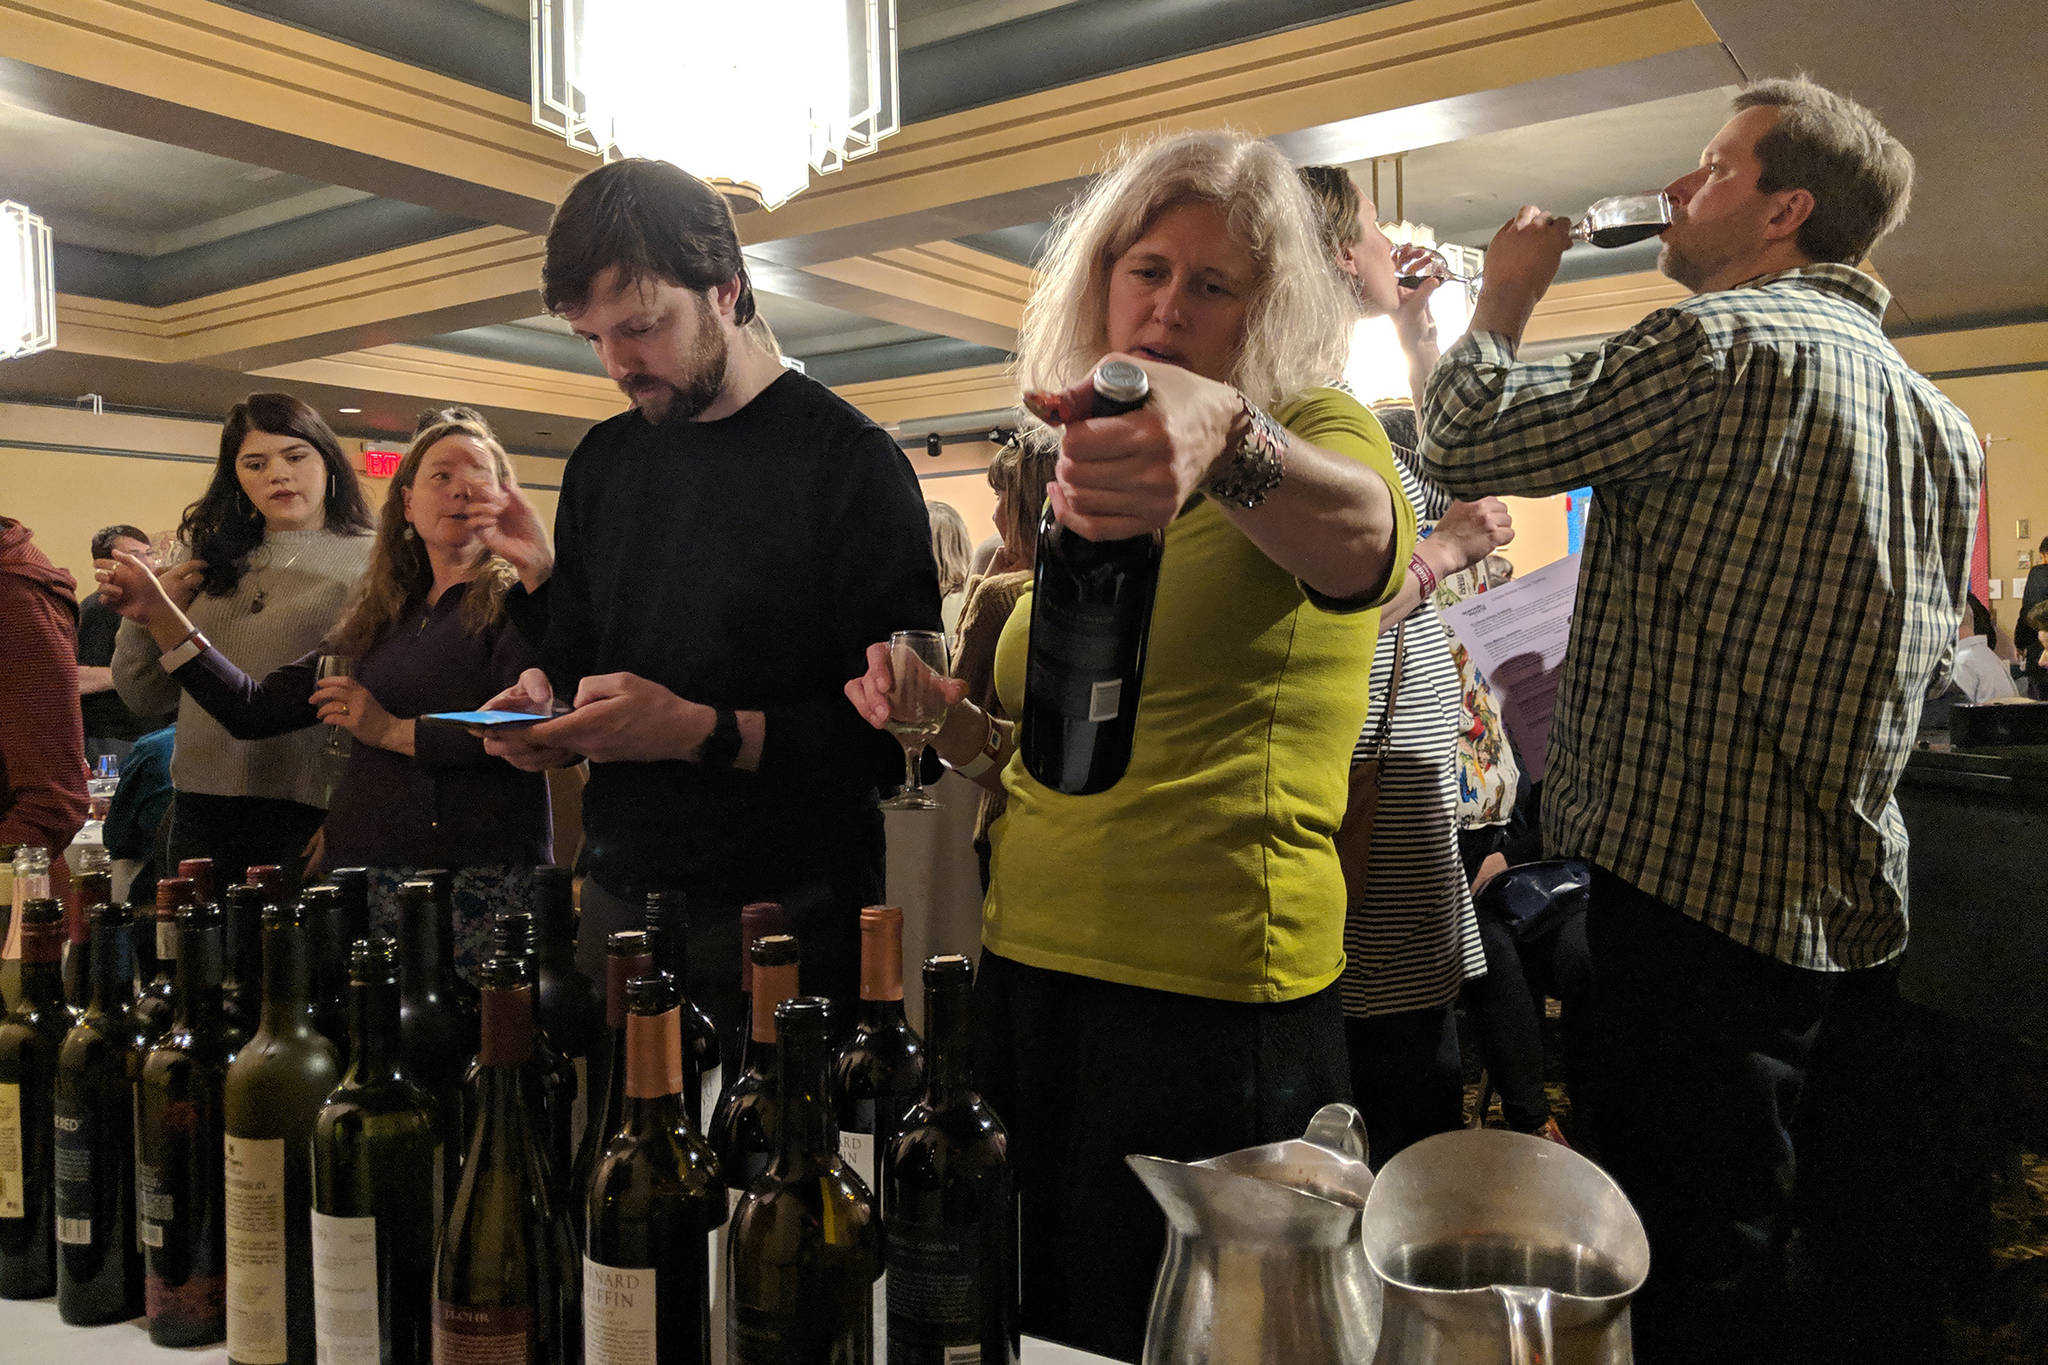 Photos: Wine and beer tasting and silent auction held to benefit Juneau Animal Rescue